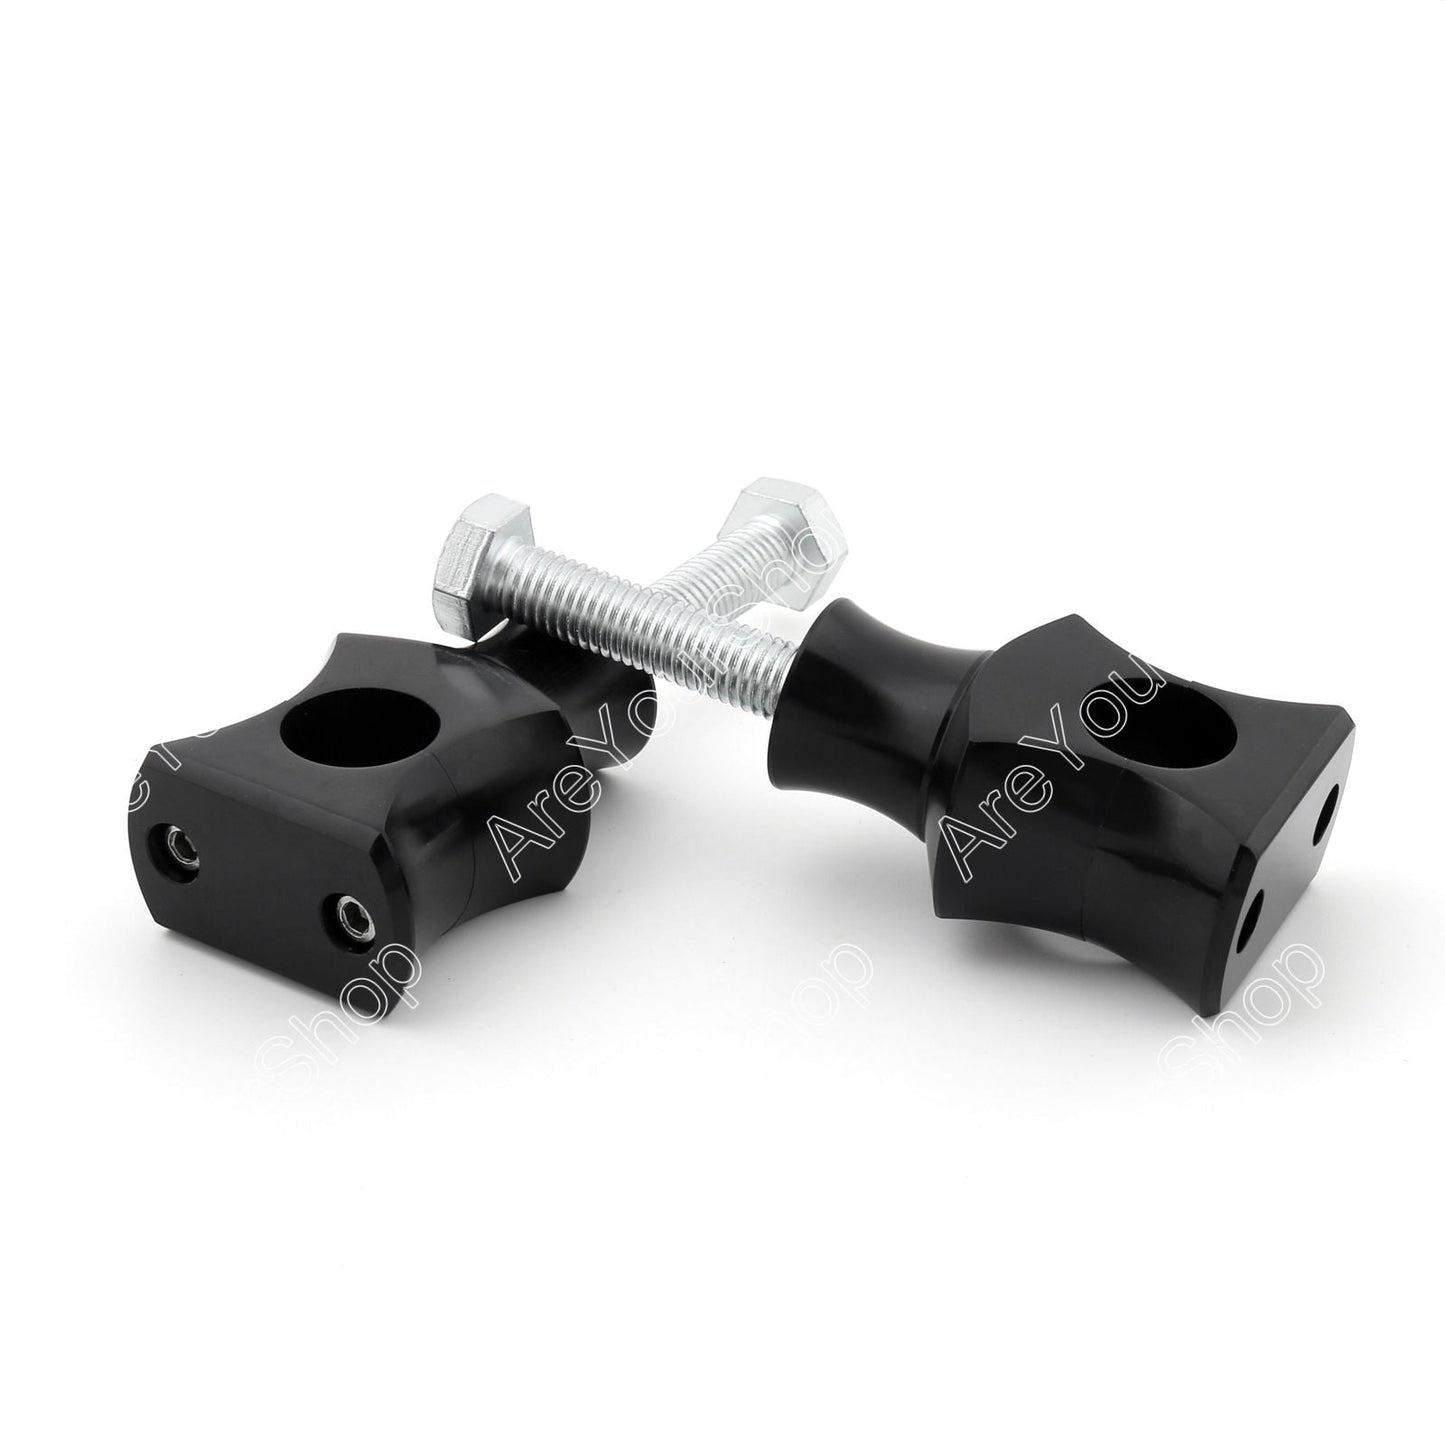 1" 25mm Black Handlebar Risers Clamp For Harley Fat Boy Dyna Sportster Touring